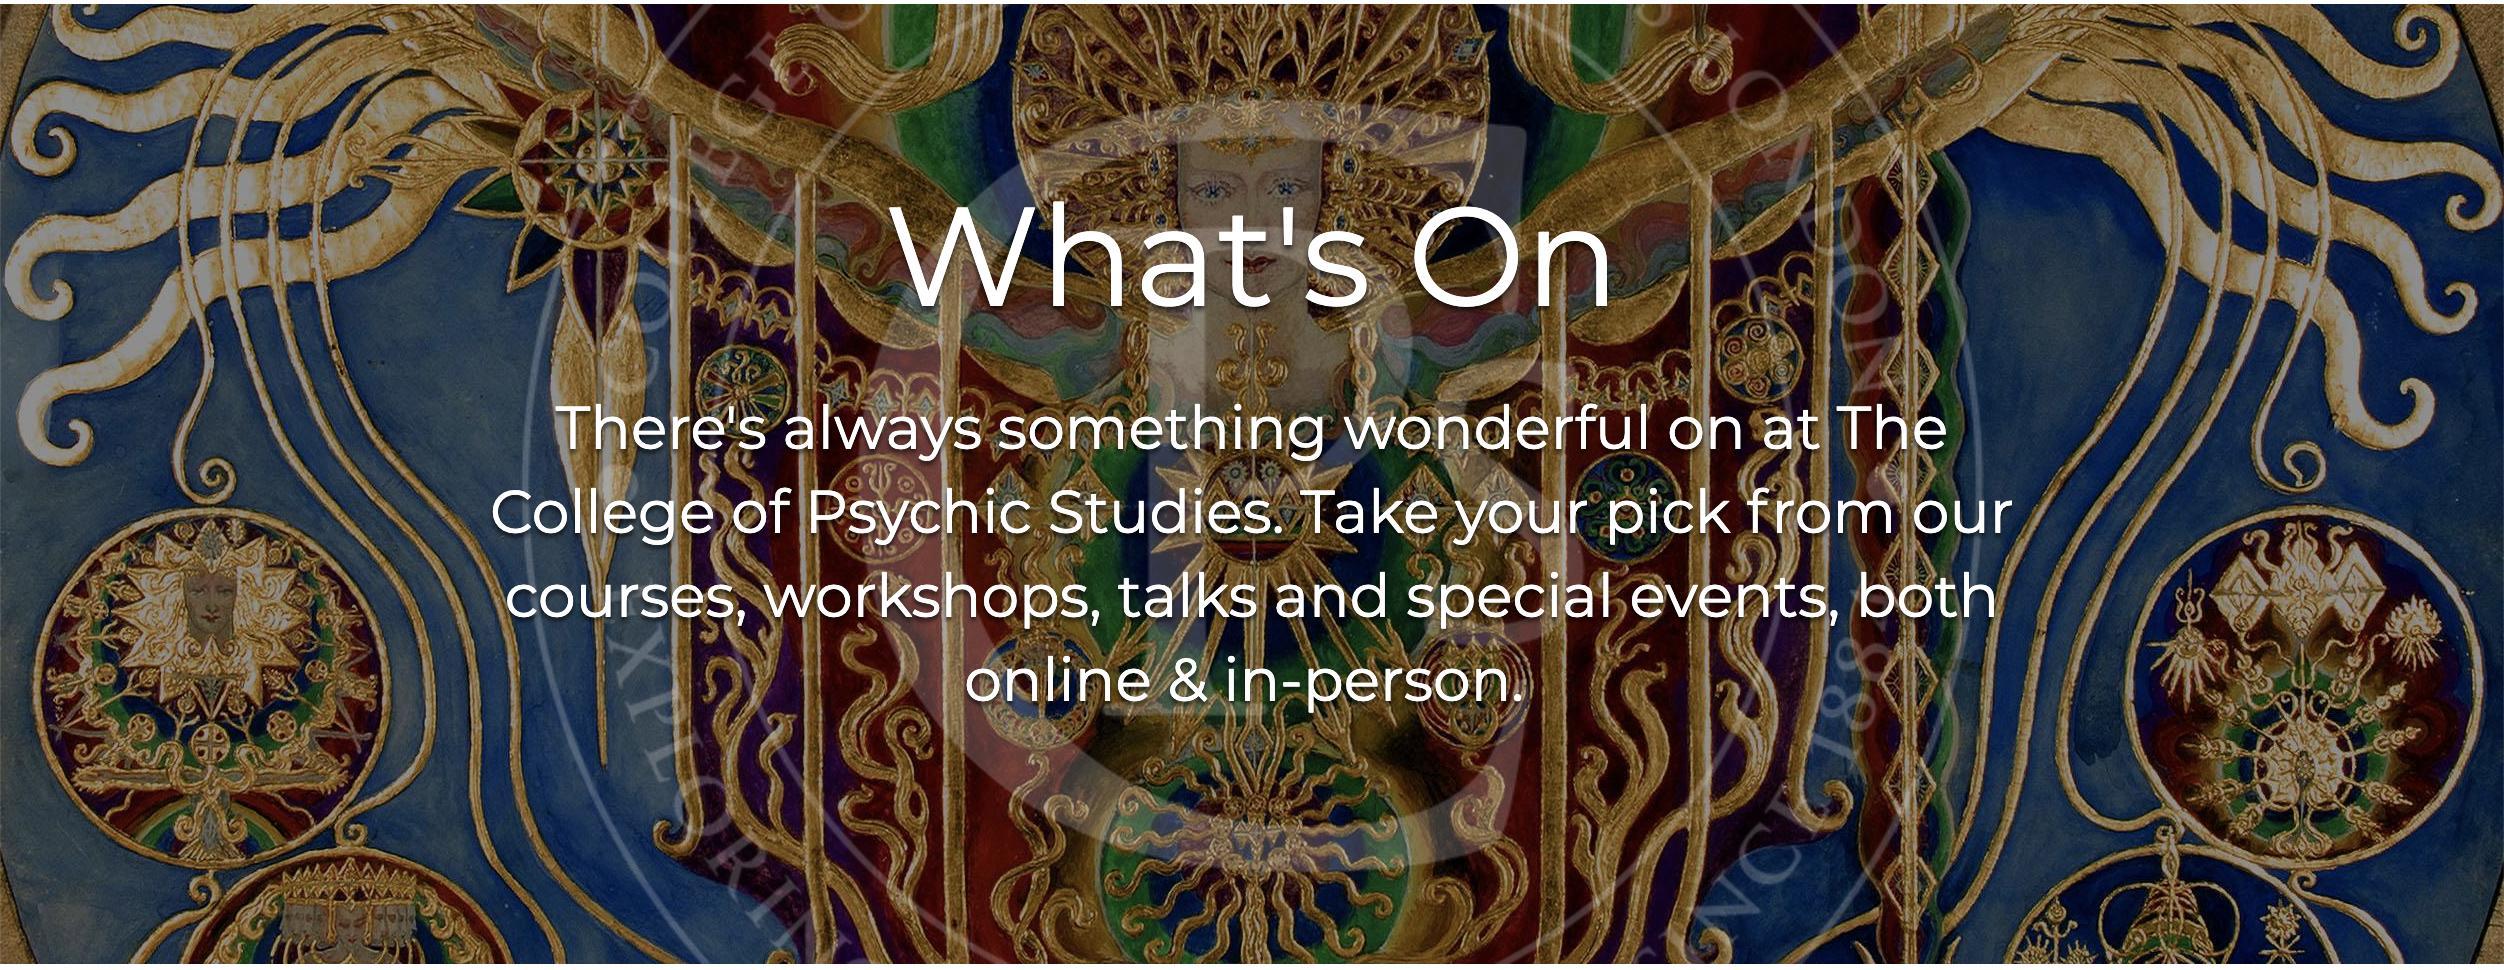 Banner with link to events at The College of Psychic Studies